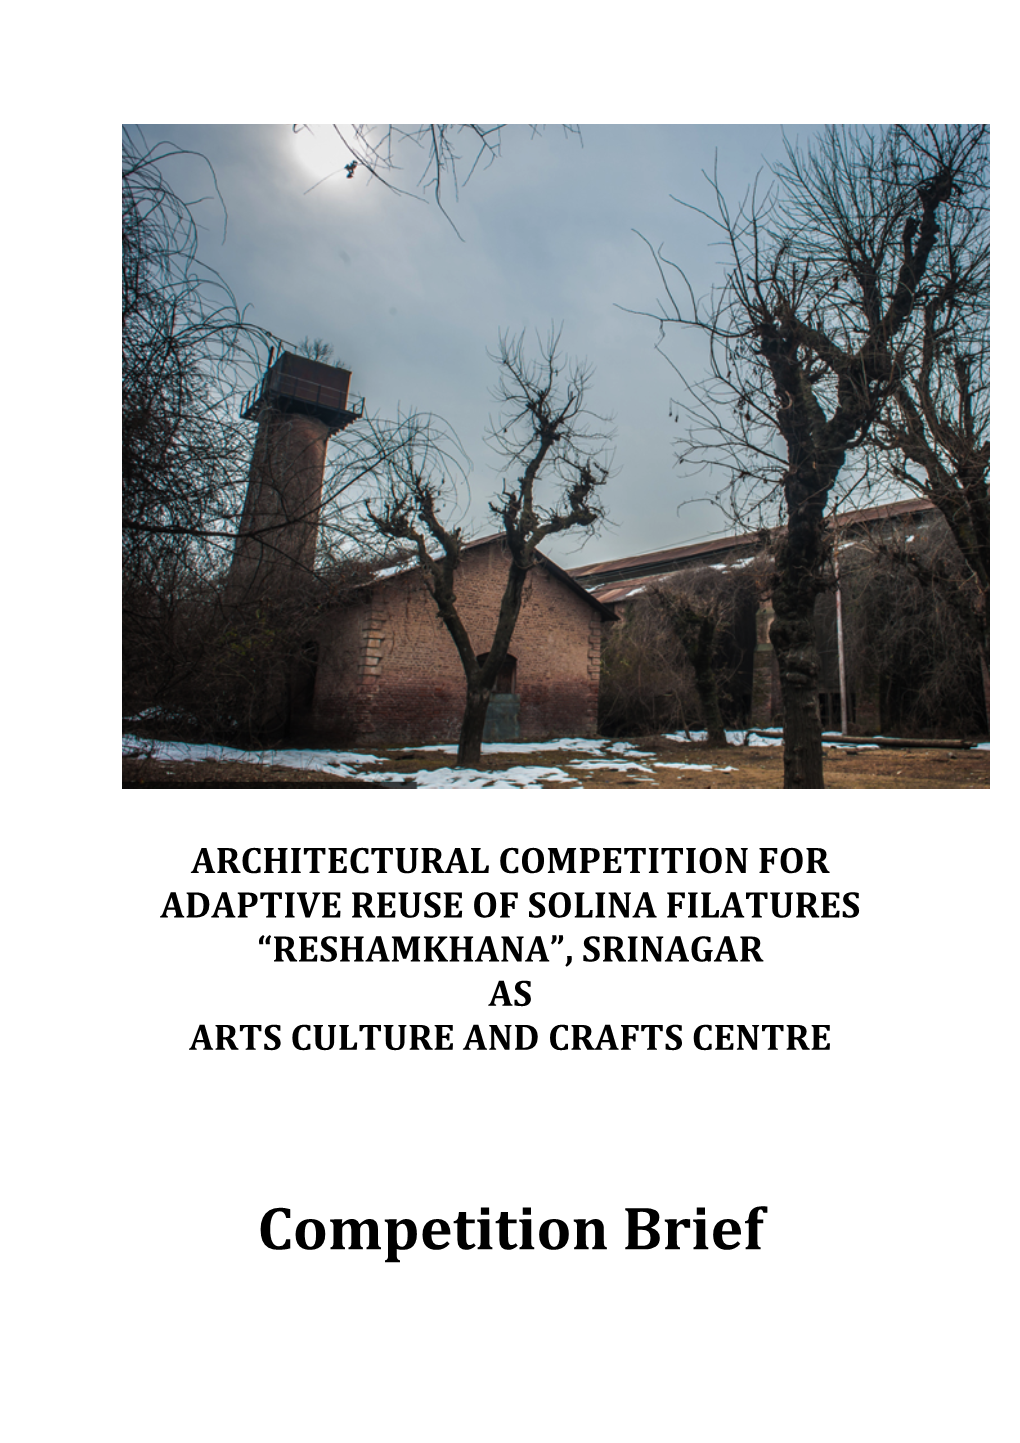 Architectural Competition for Adaptive Reuse of Solina Filatures “Reshamkhana”, Srinagar As Arts Culture and Crafts Centre